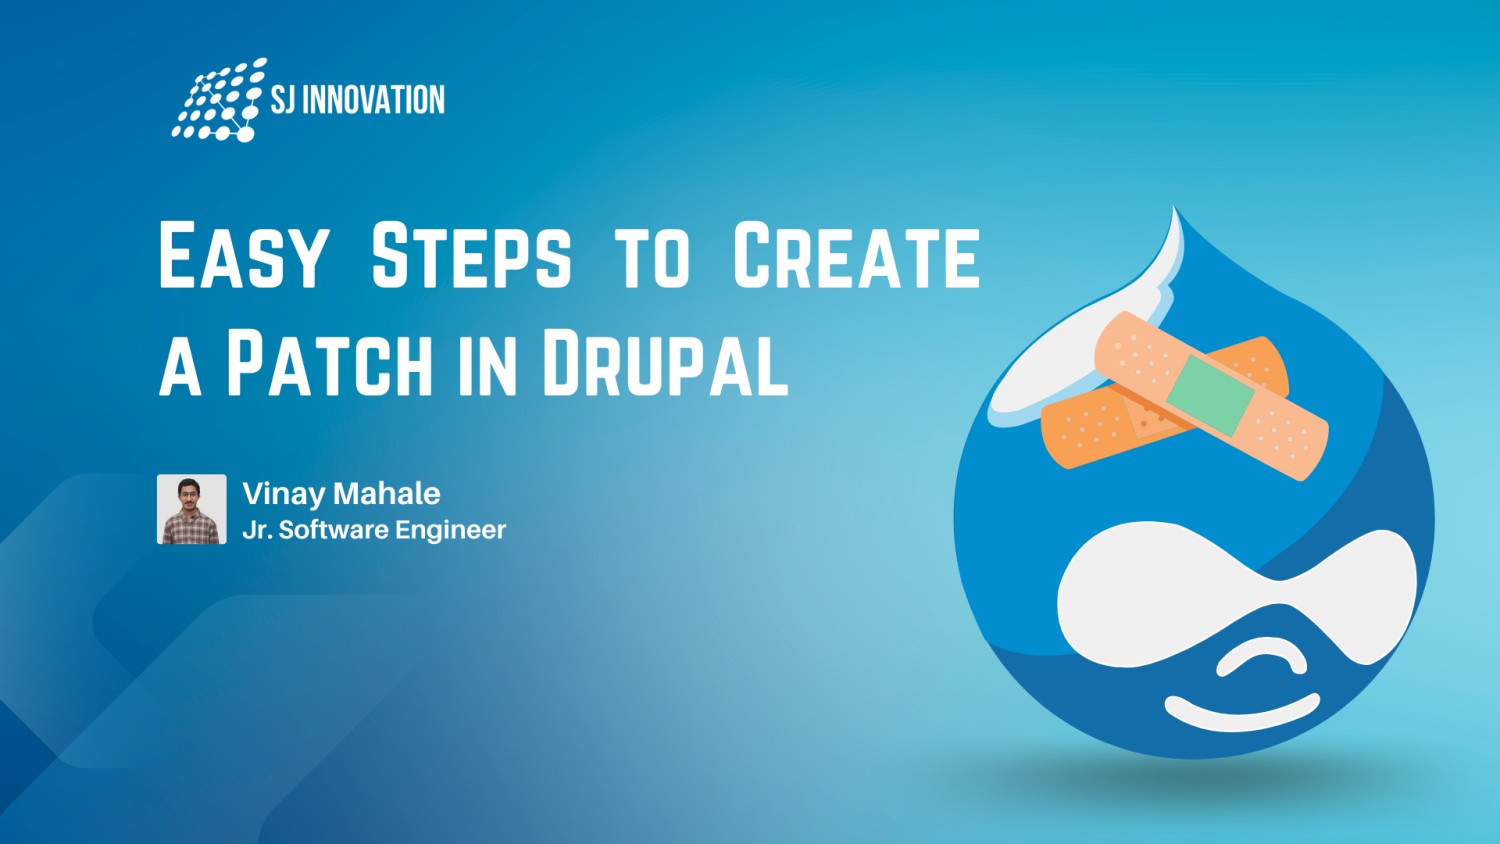 Easy Steps to Create a Patch in Drupal